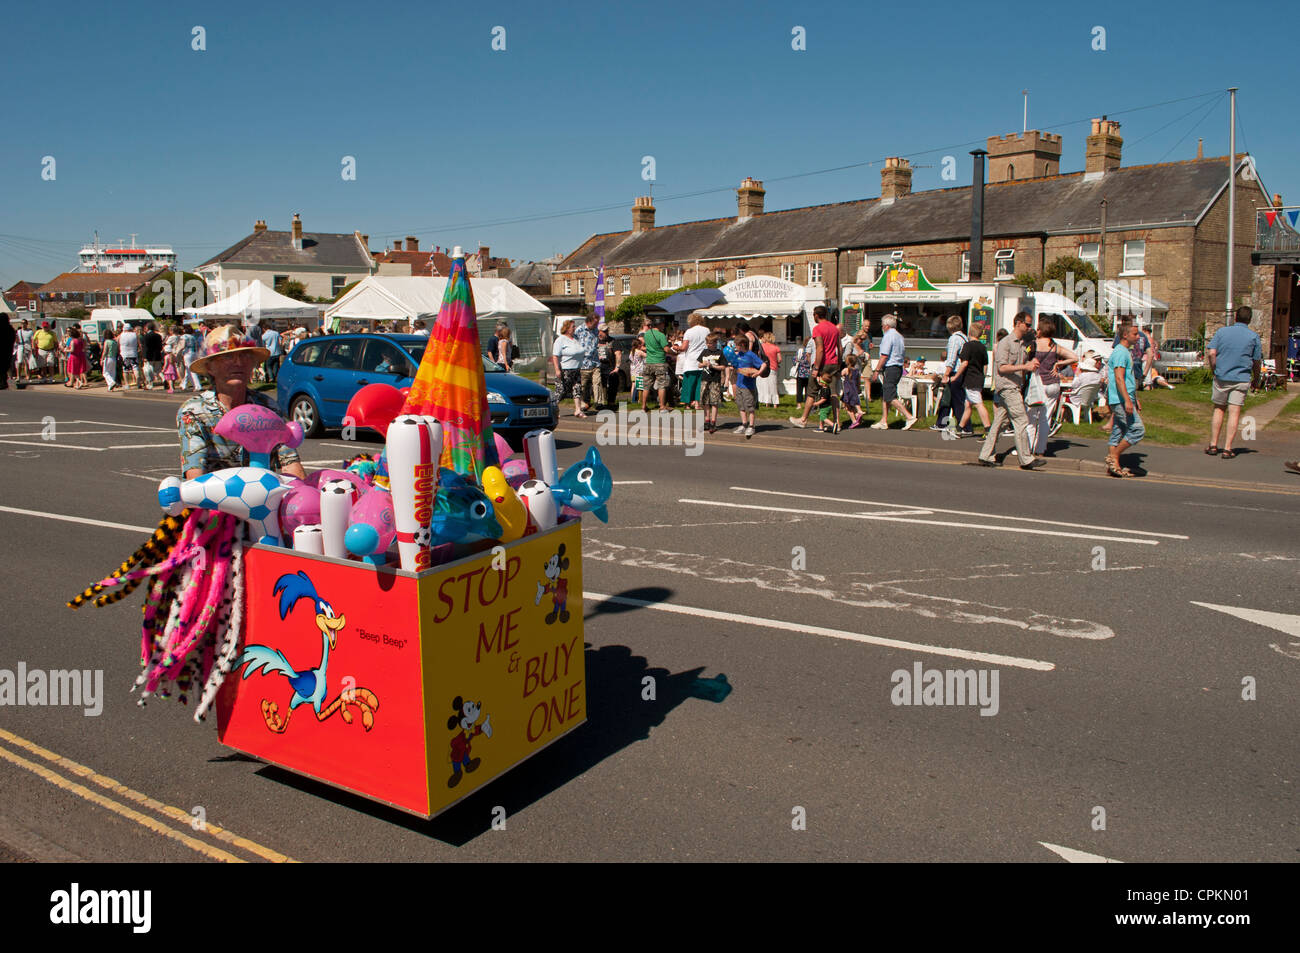 Stop Me And Buy One cart being pushed along by female street vendor during Yarmouth Old Gaffer's Festival 2012,  Isle of Wight. Stock Photo